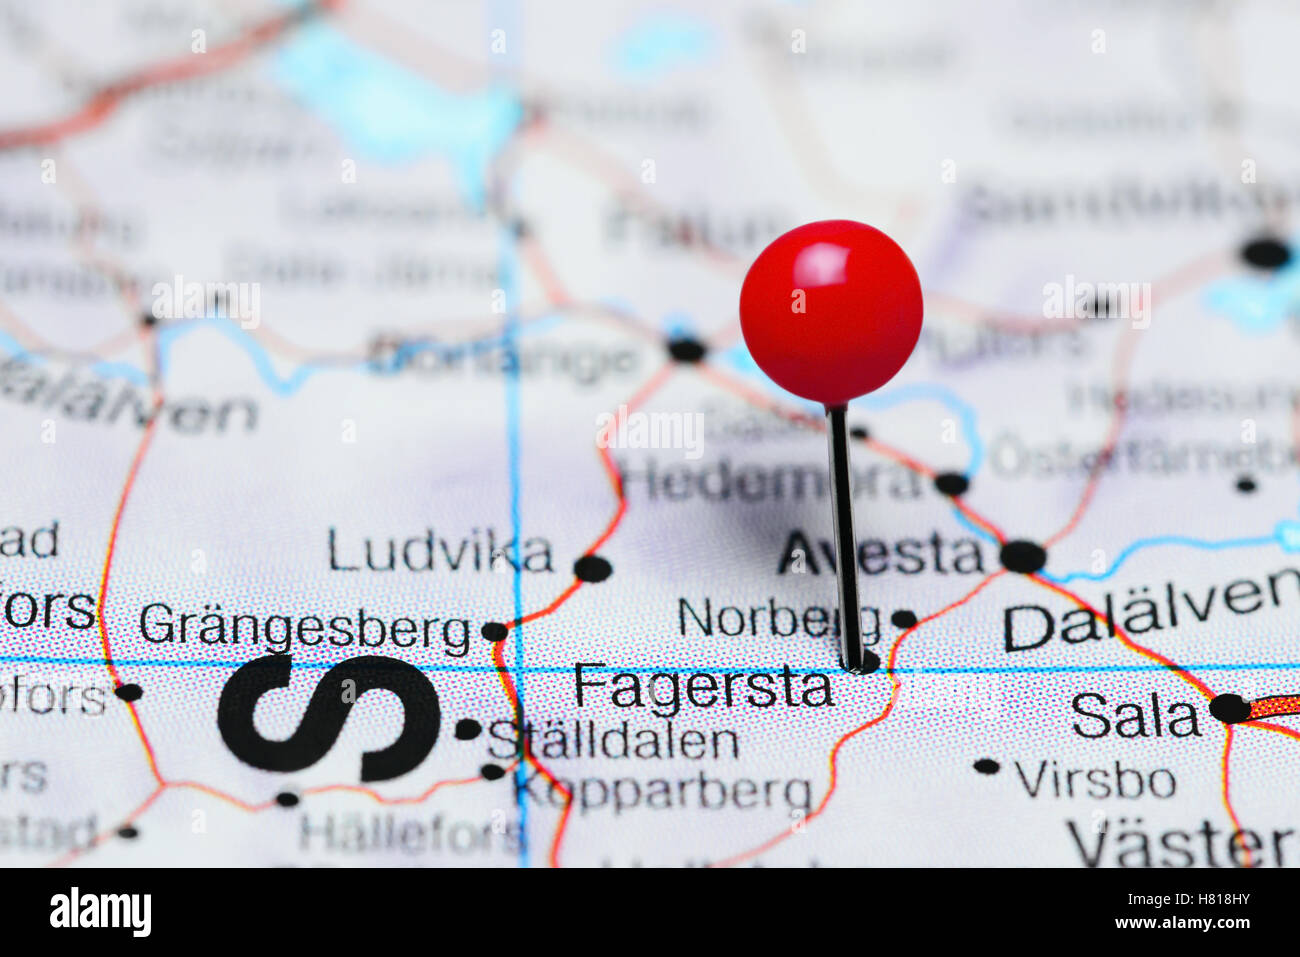 Fagersta pinned on a map of Sweden Stock Photo